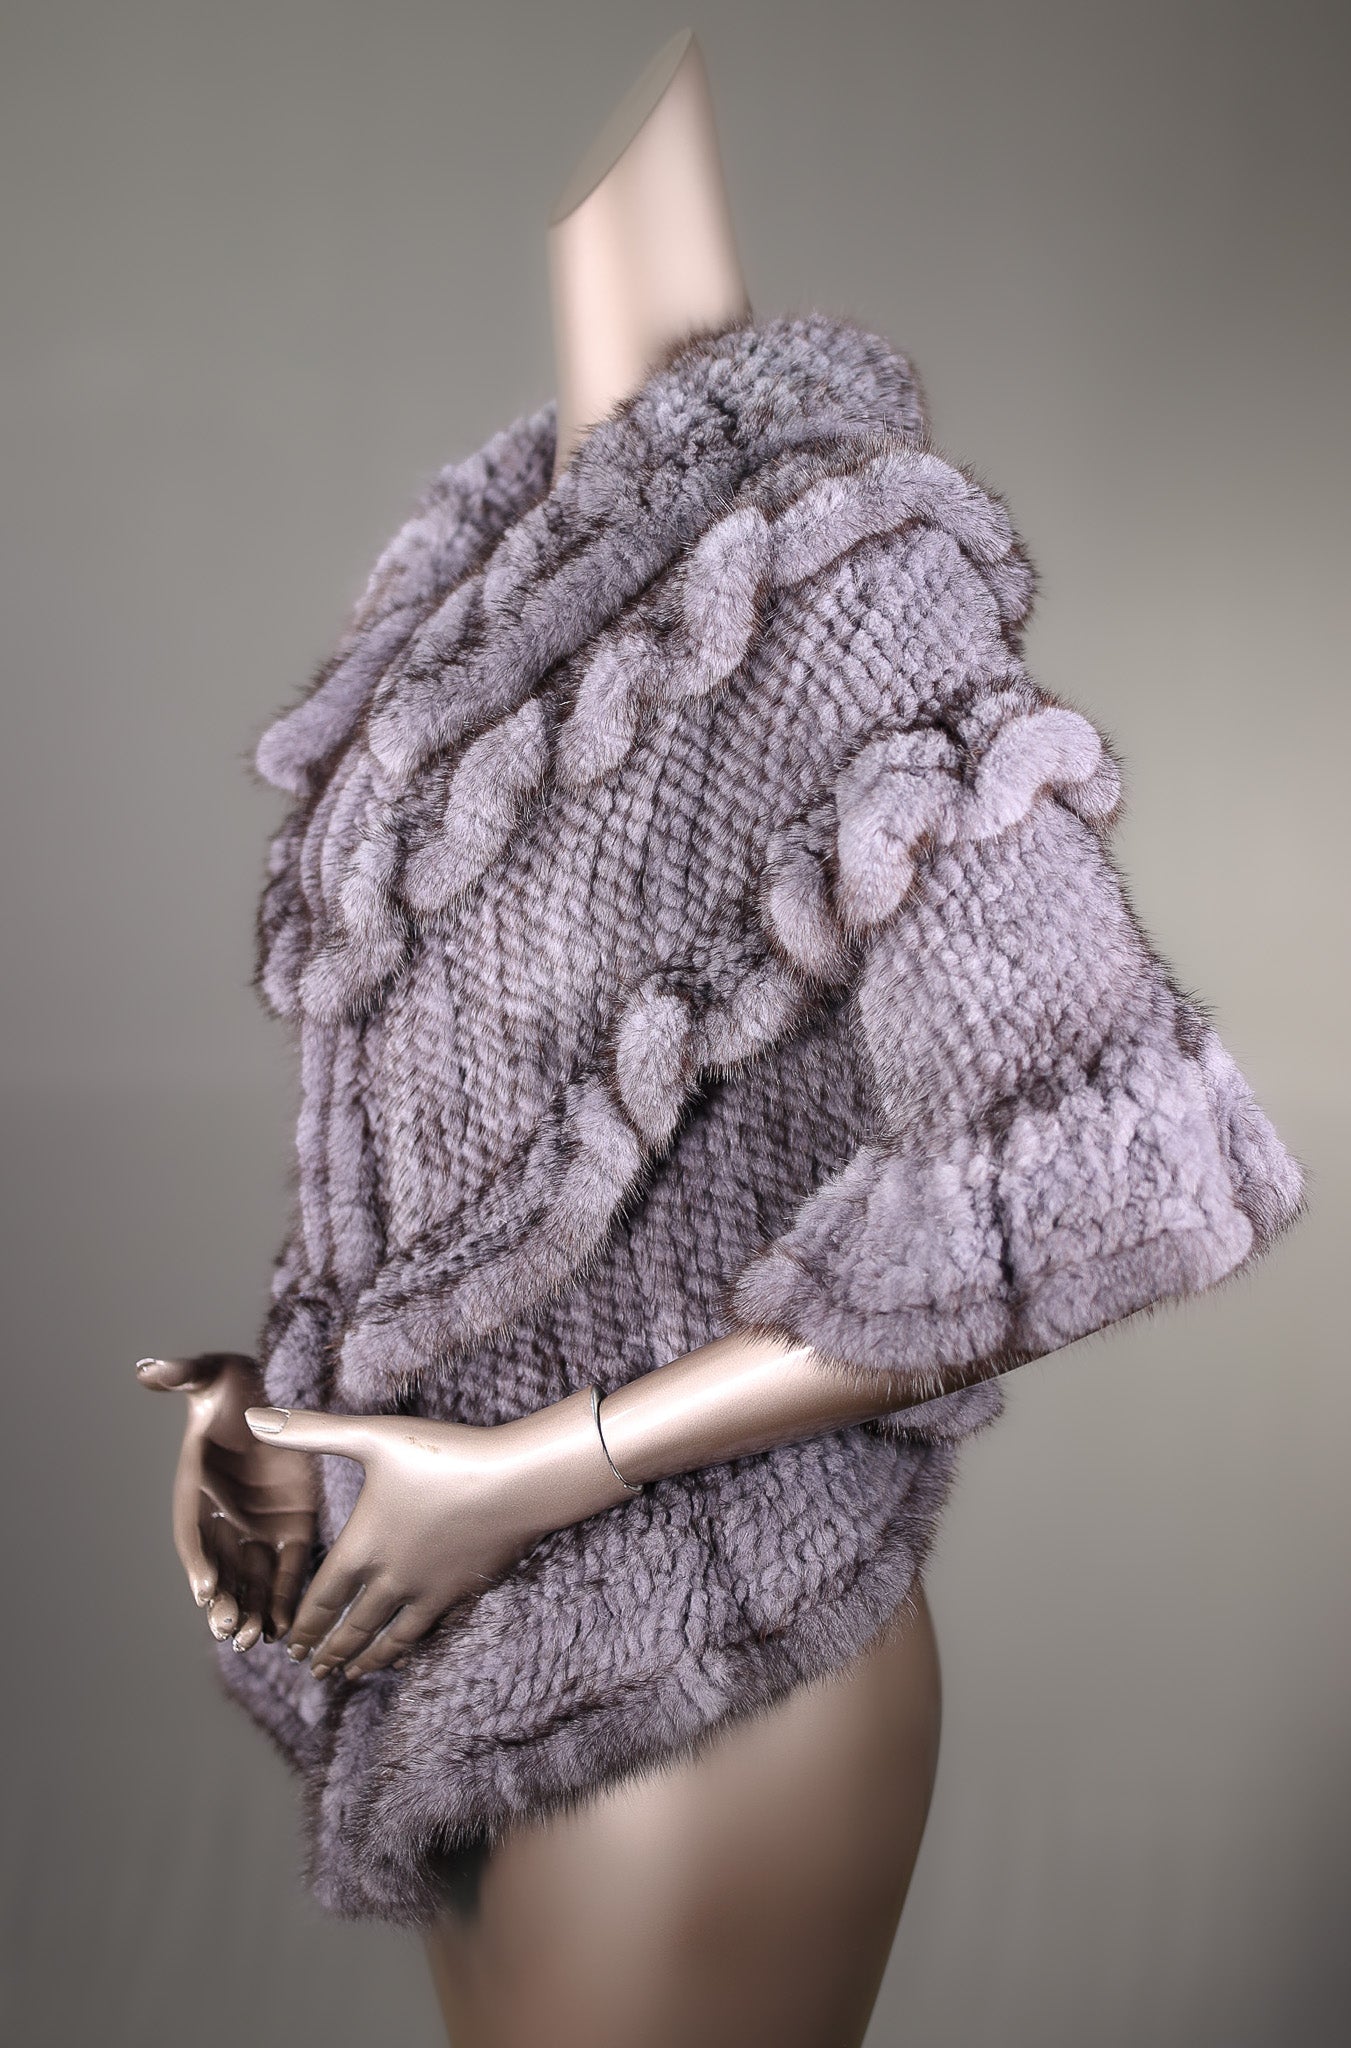 Knitted Mink Stole with Ruffles Trimming